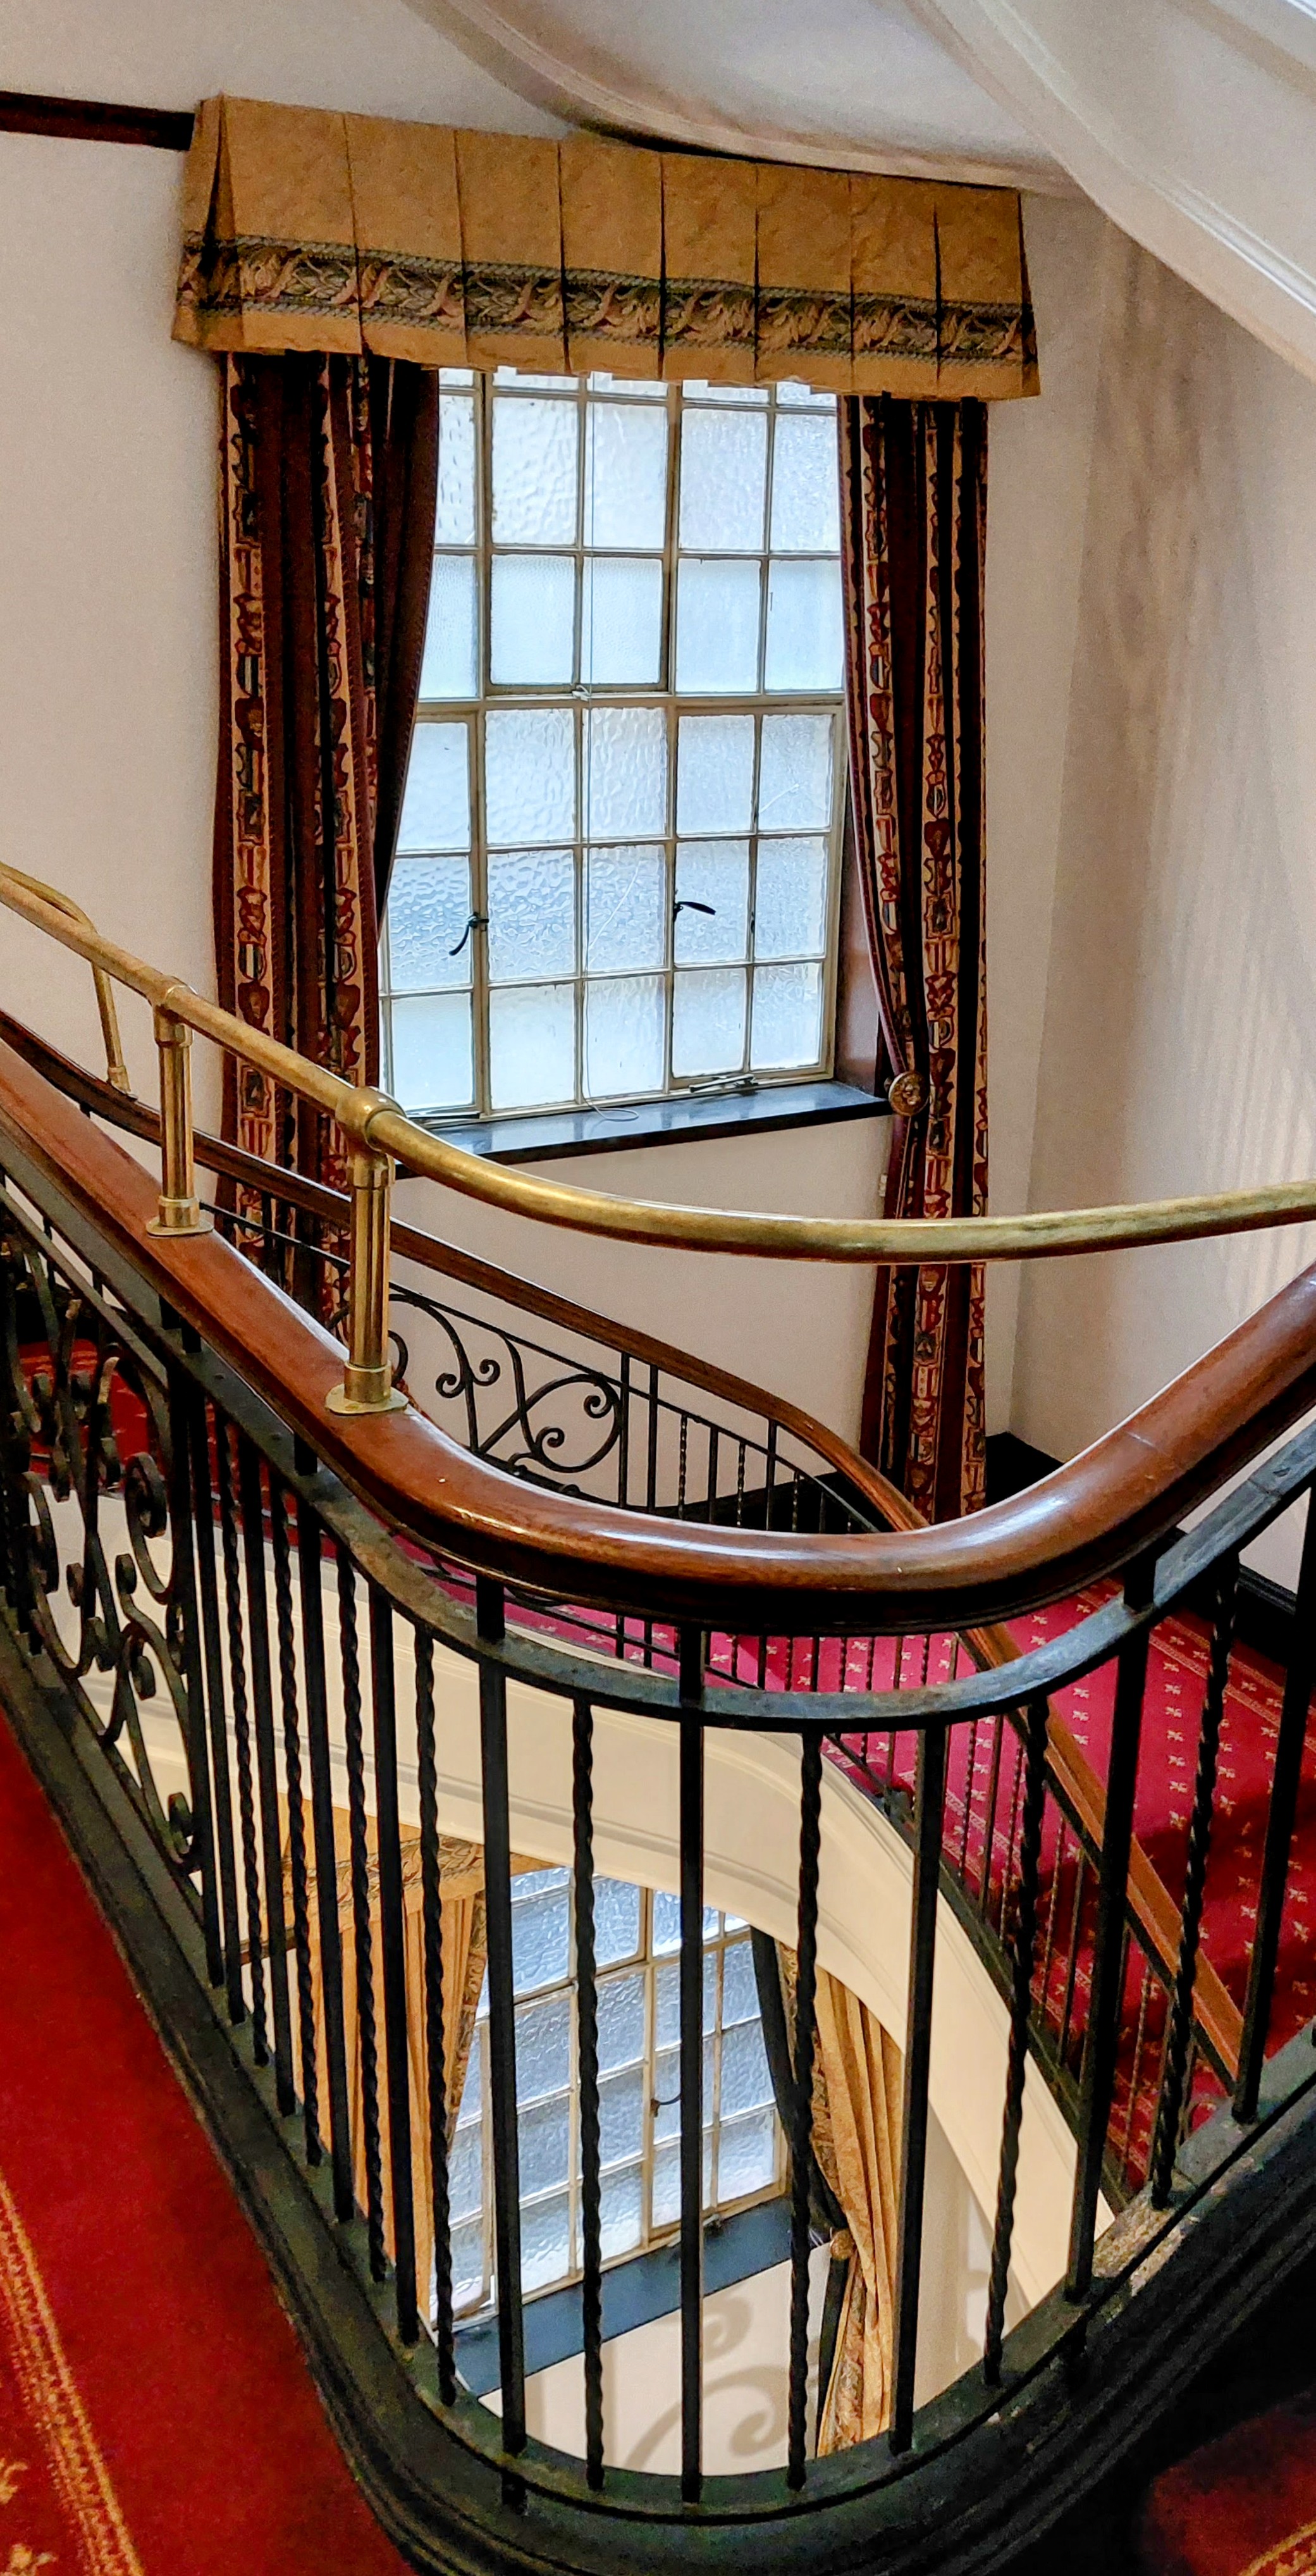 Plush stairs and bannisters of the Wellesley Boutique Hotel